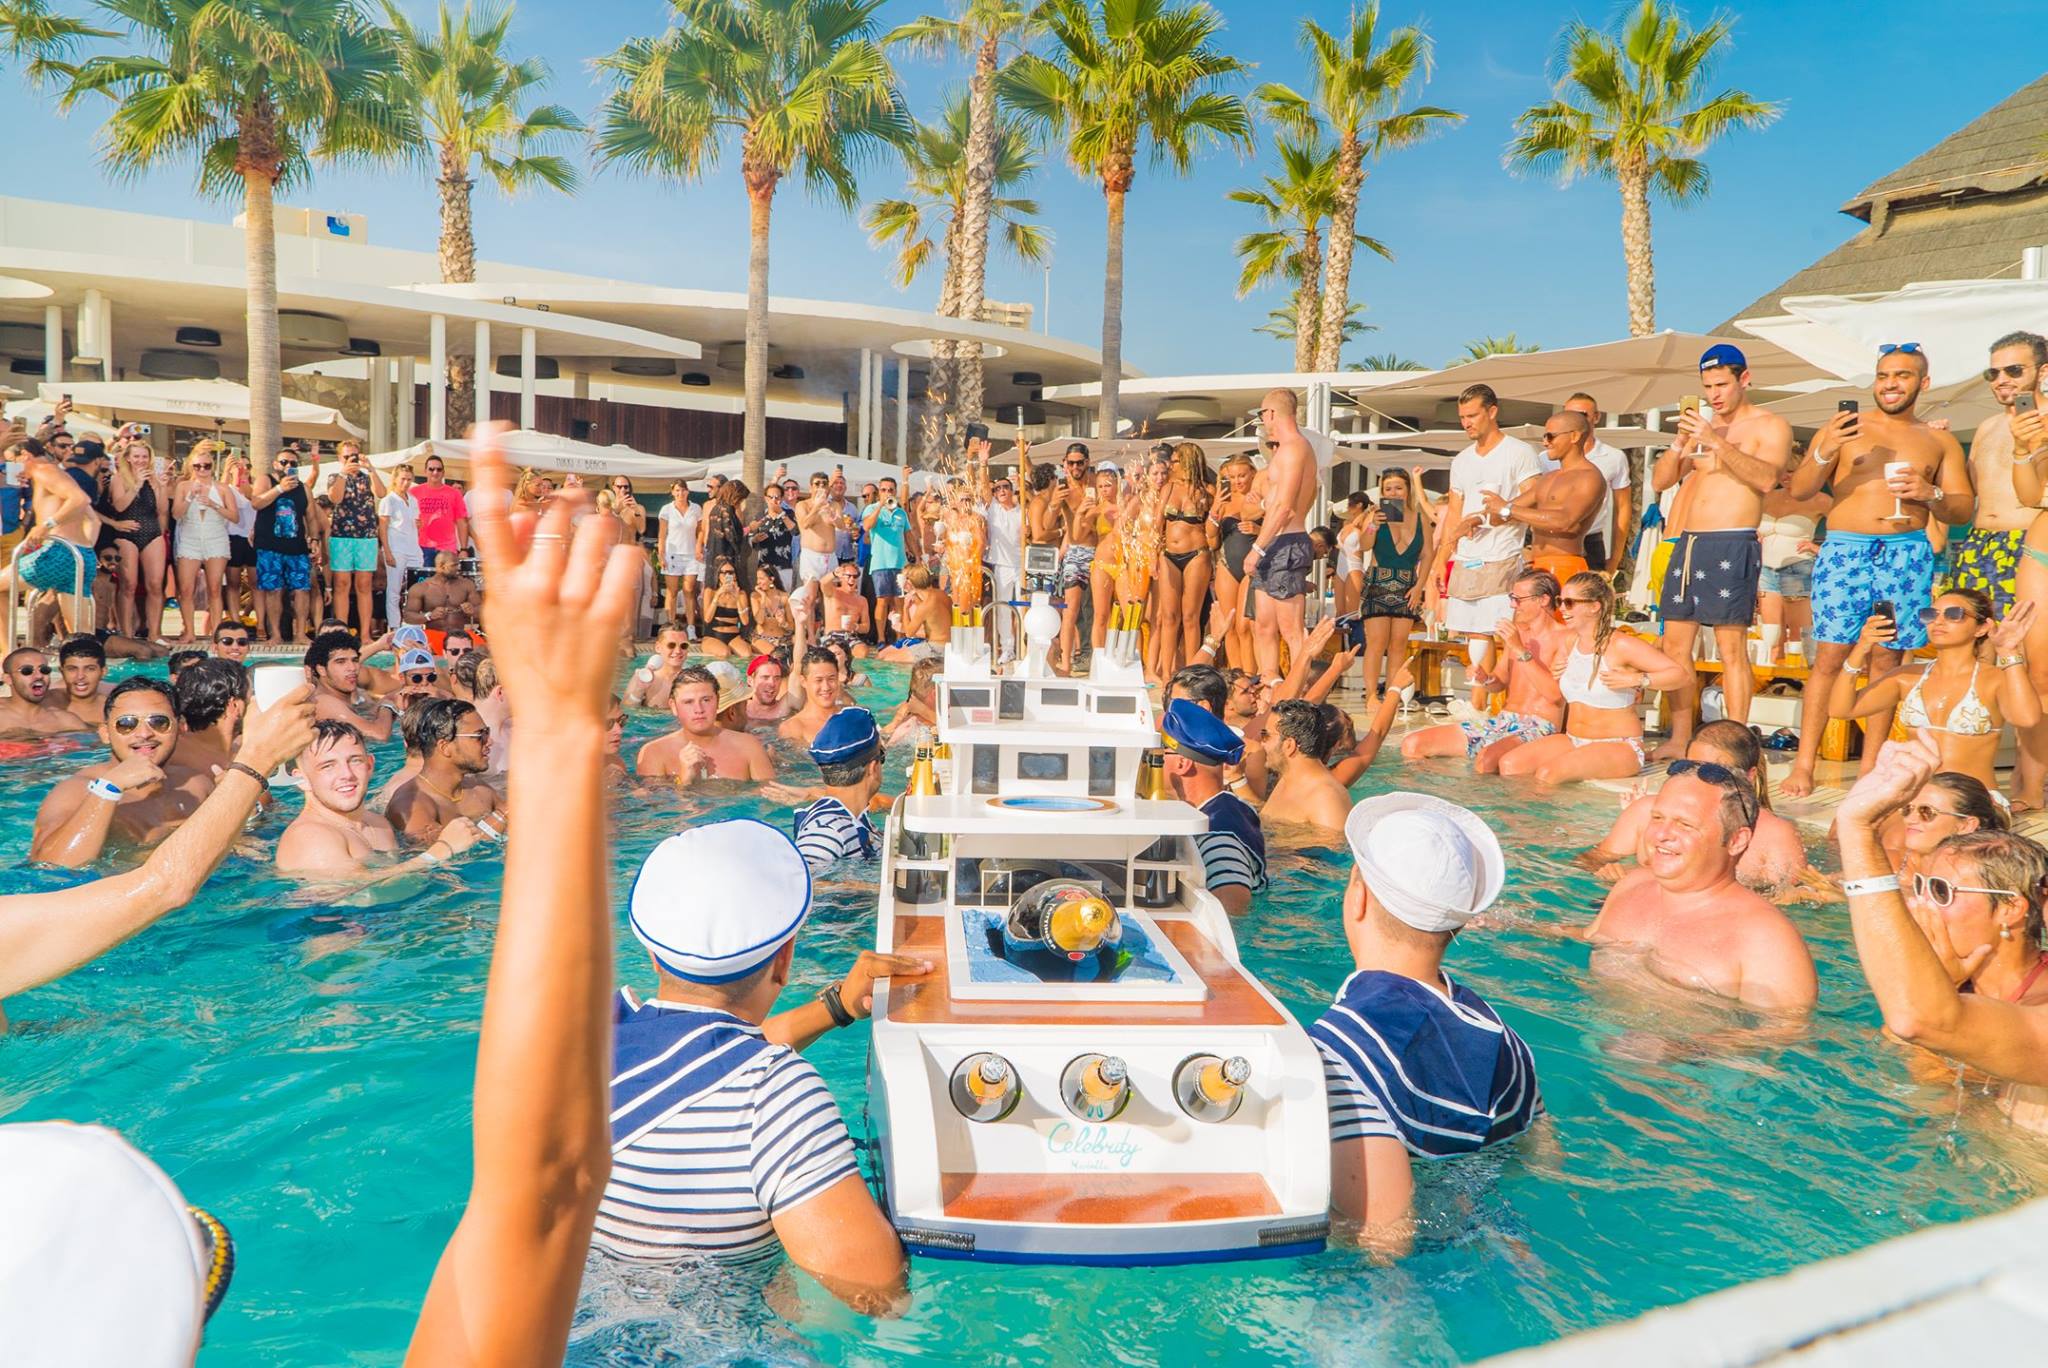 The Best 10 Events On In Marbella Beach Clubs & Pool Parties 2020